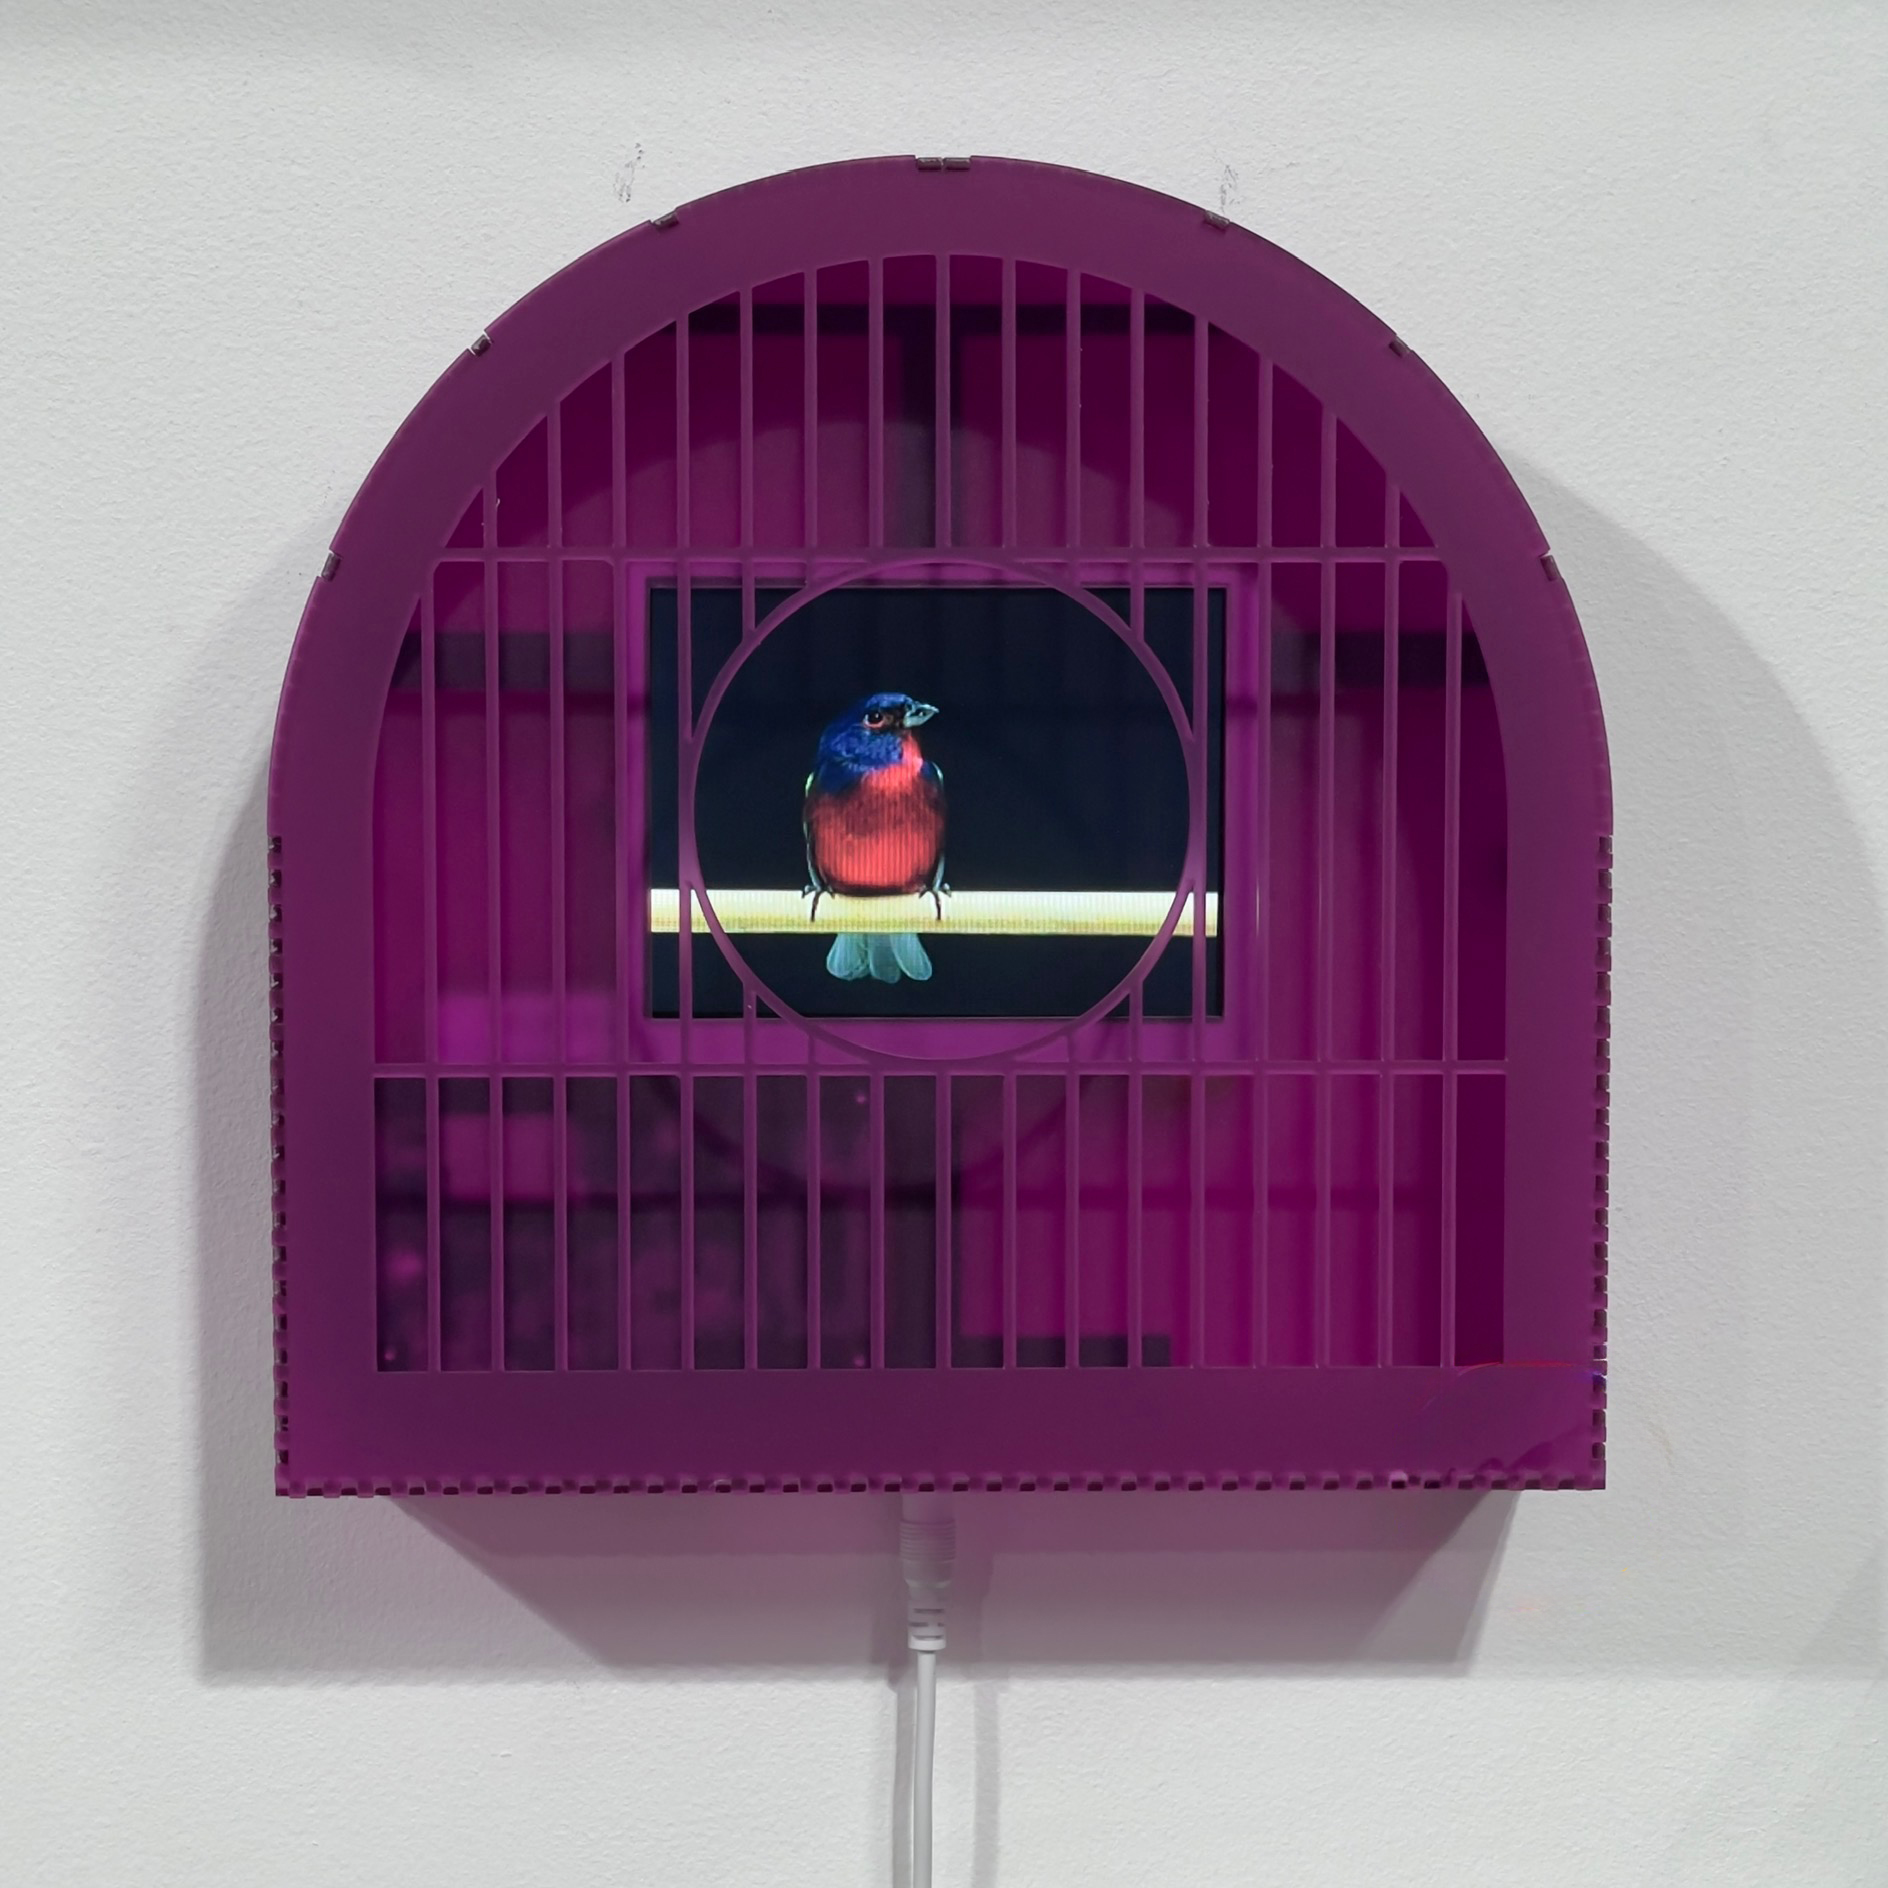 
							

									Troy Abbott									Homie (Painted Bunting) 2023									Extruded acrylic, 3D printed ABS with 44 minute video loop<br />
10 x 10 x 13 inches									


							